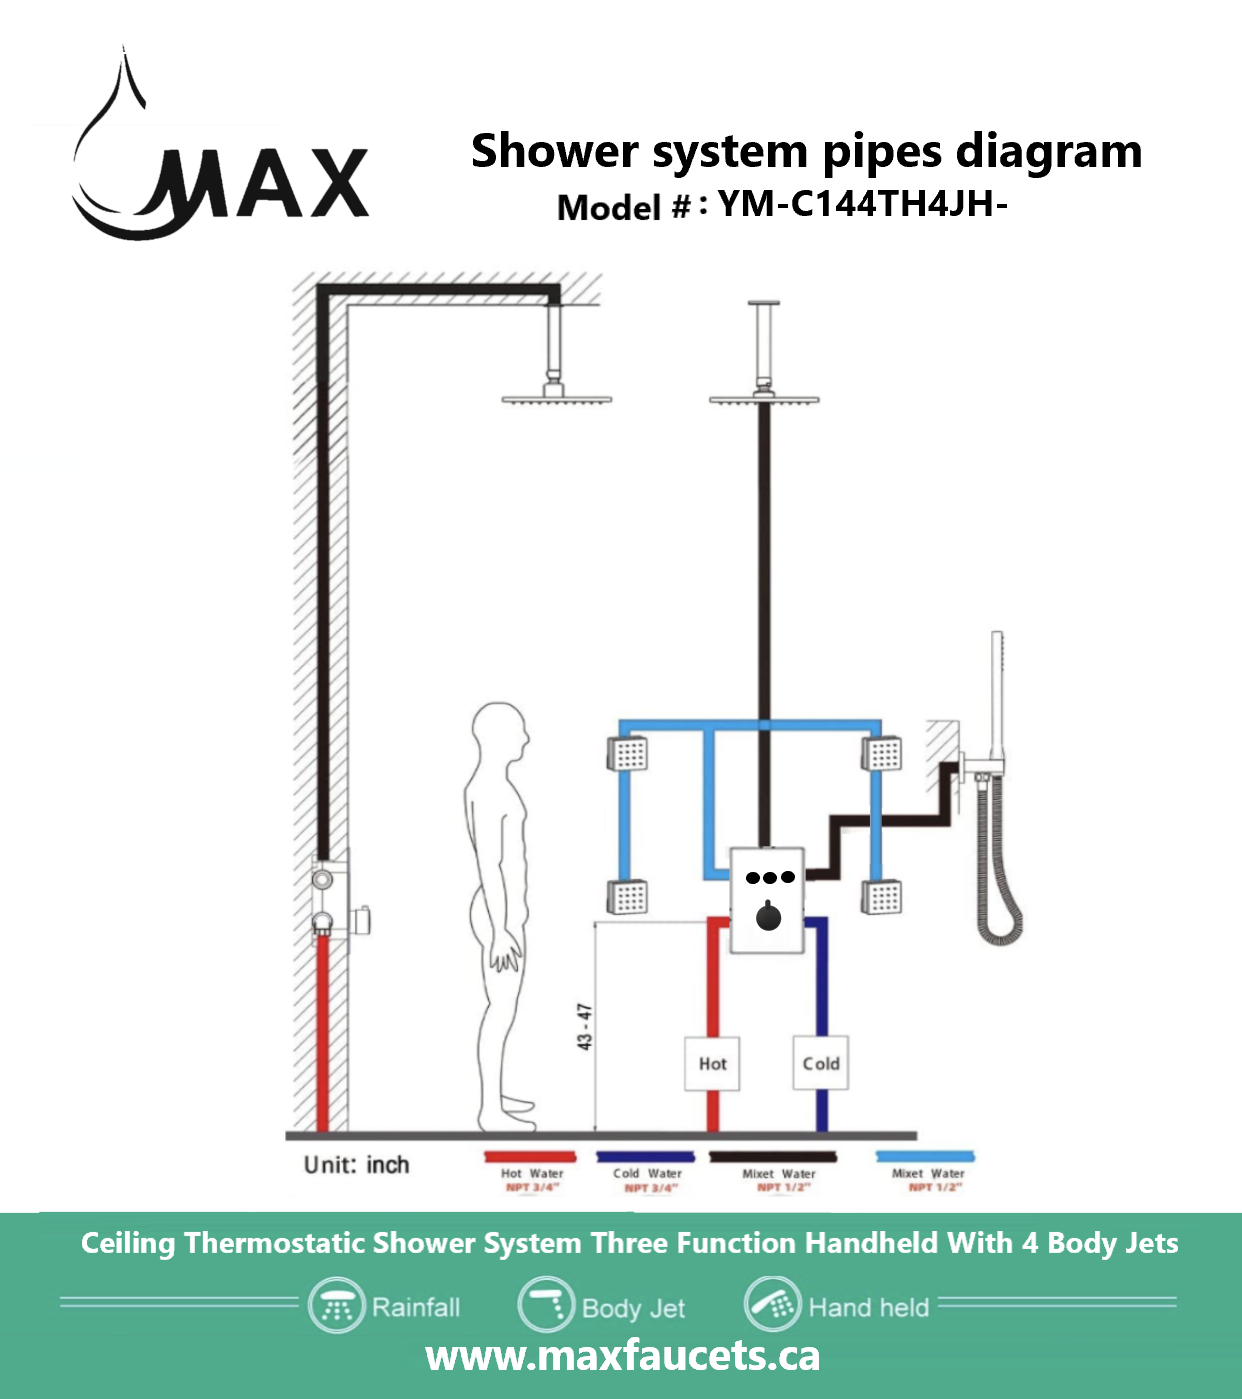 Ceiling Thermostatic Shower System Three Function Handheld With 4 Body Jets and Valve Matte Black Finish